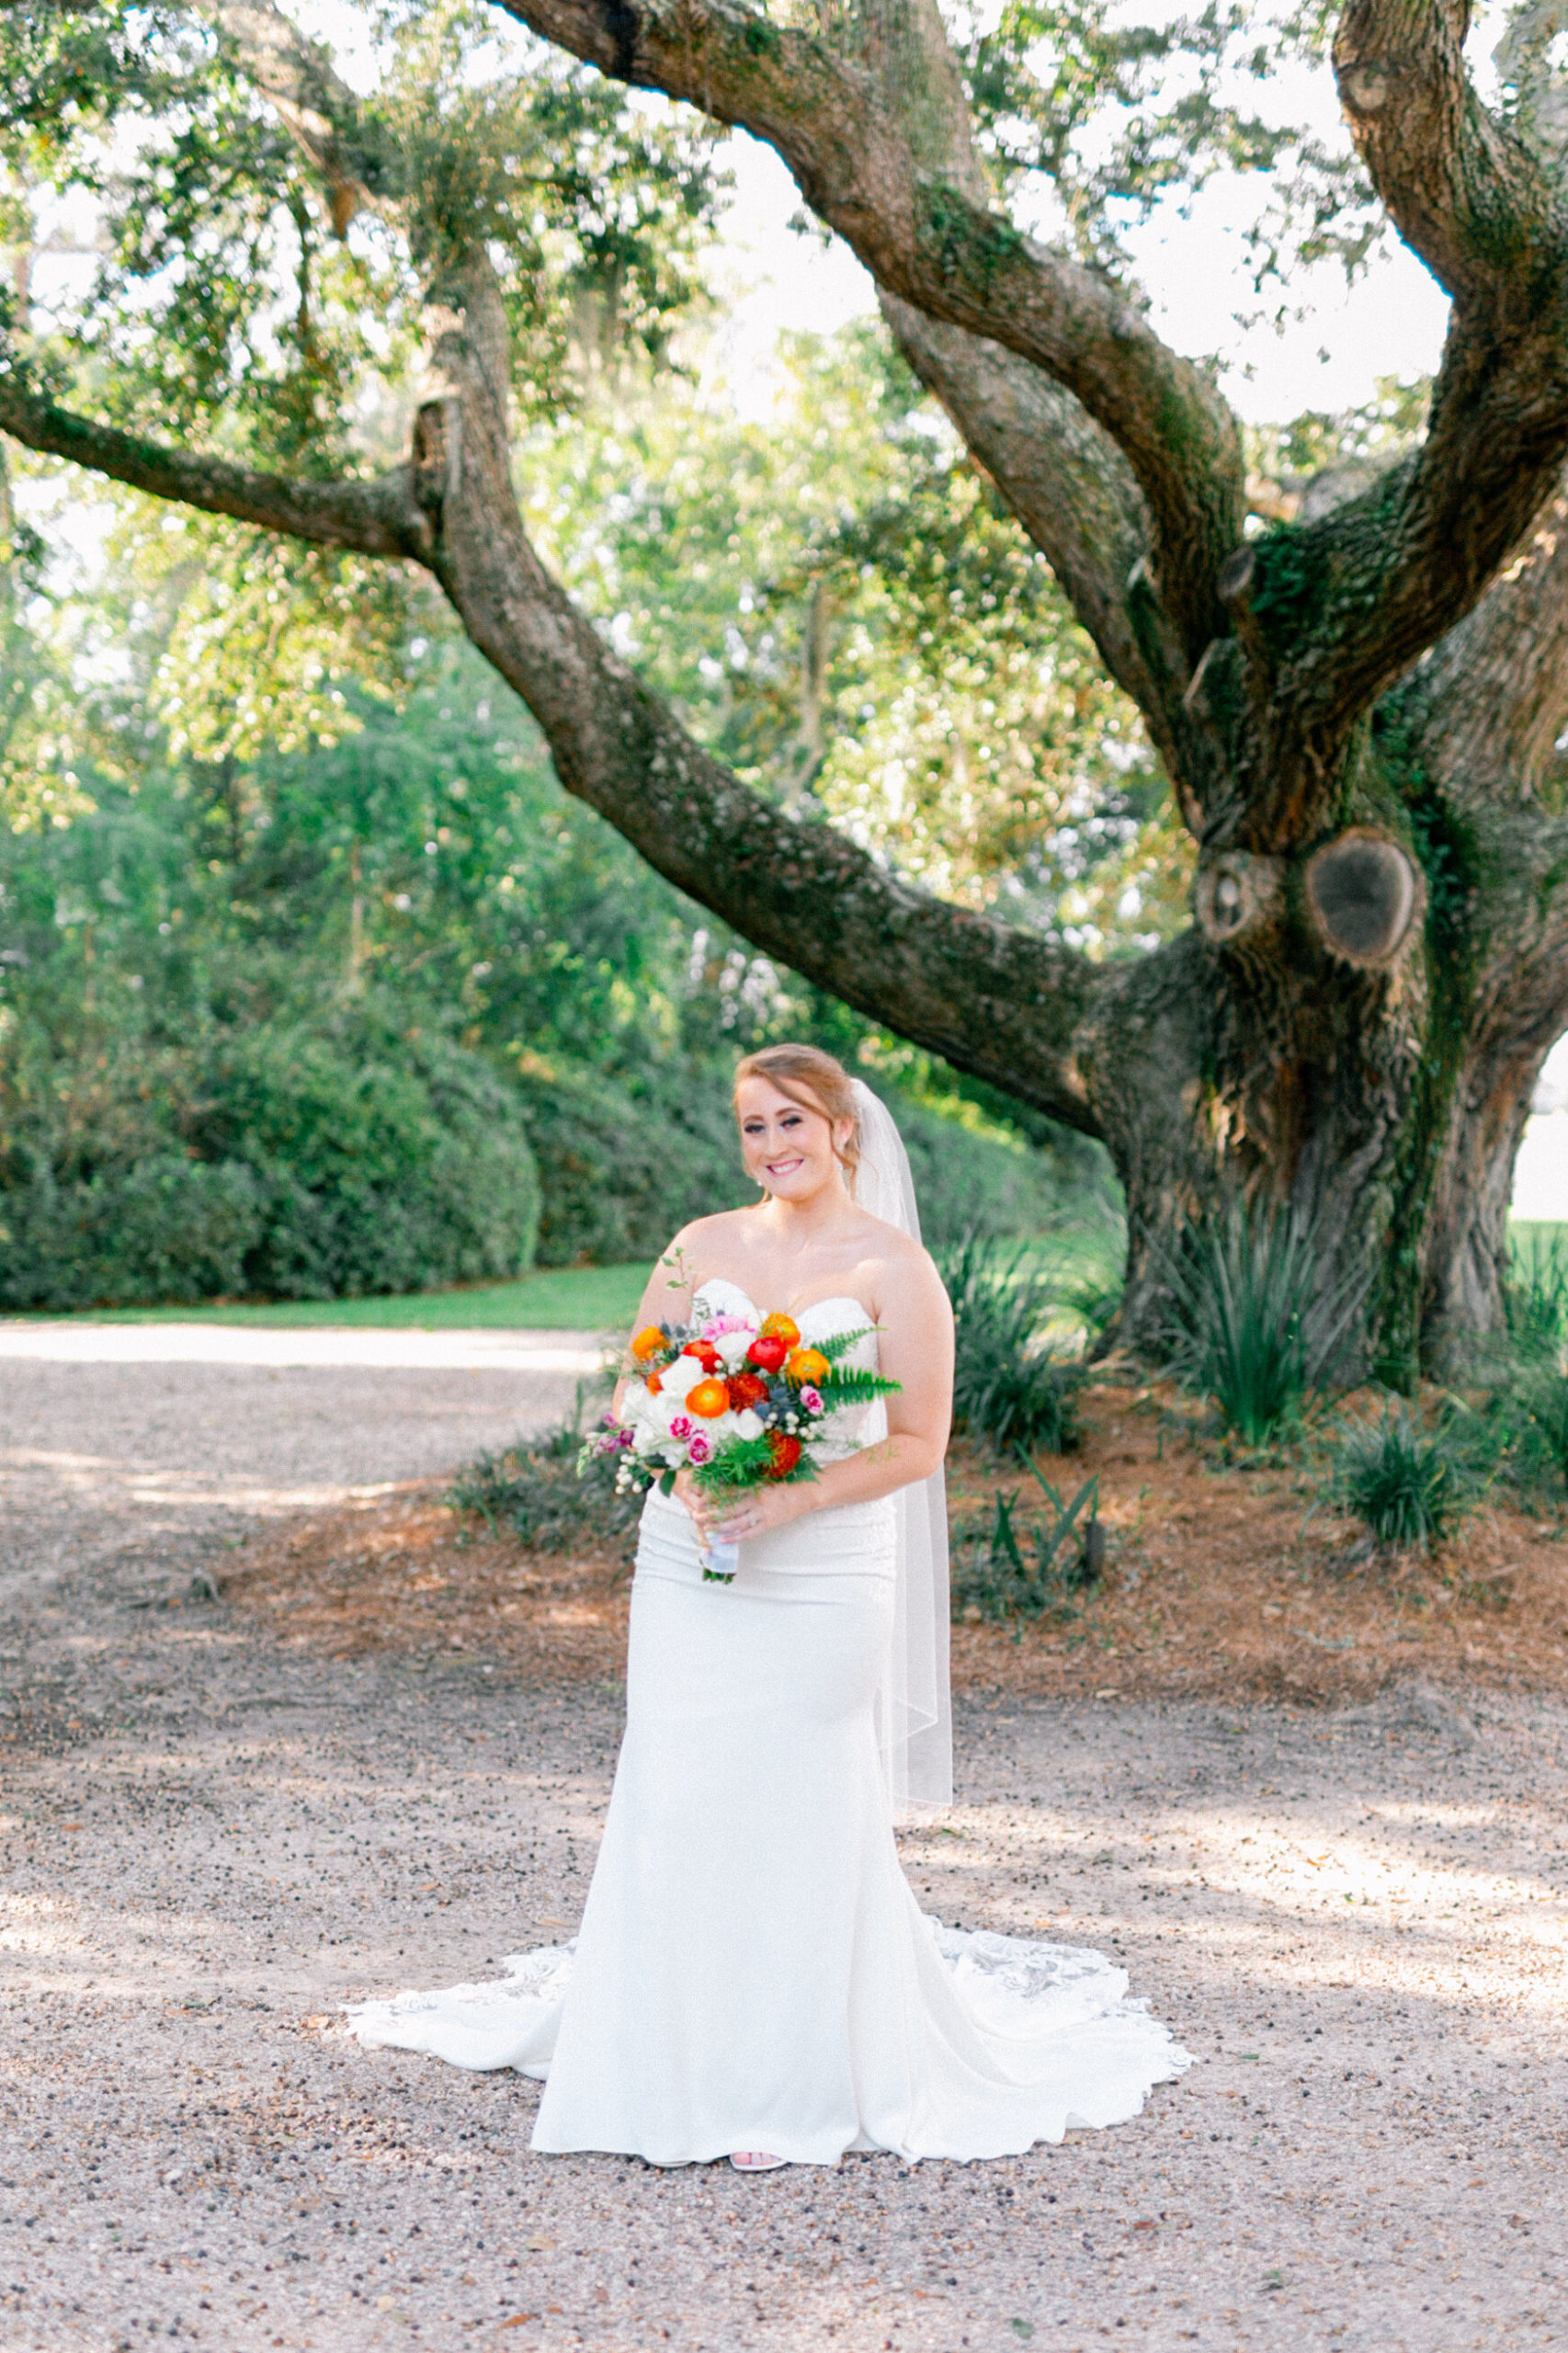 Bride before walking down the aisle under the Spanish moss in Charleston, South Carolina.